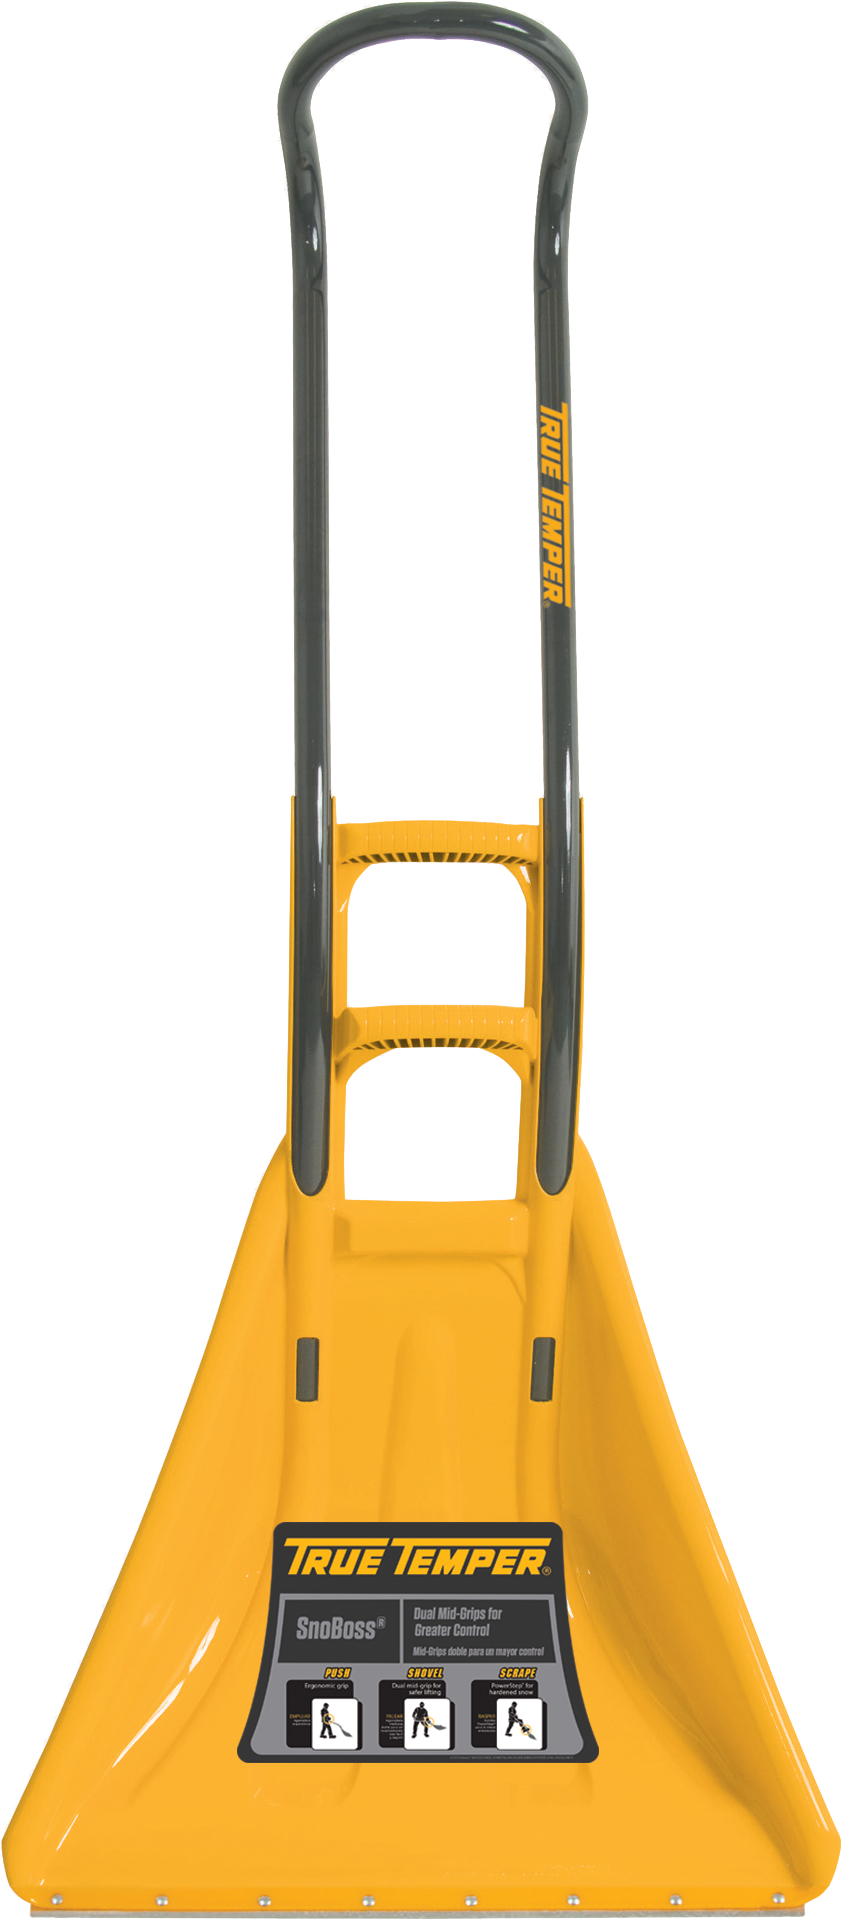 A Yellow And Grey Sledge